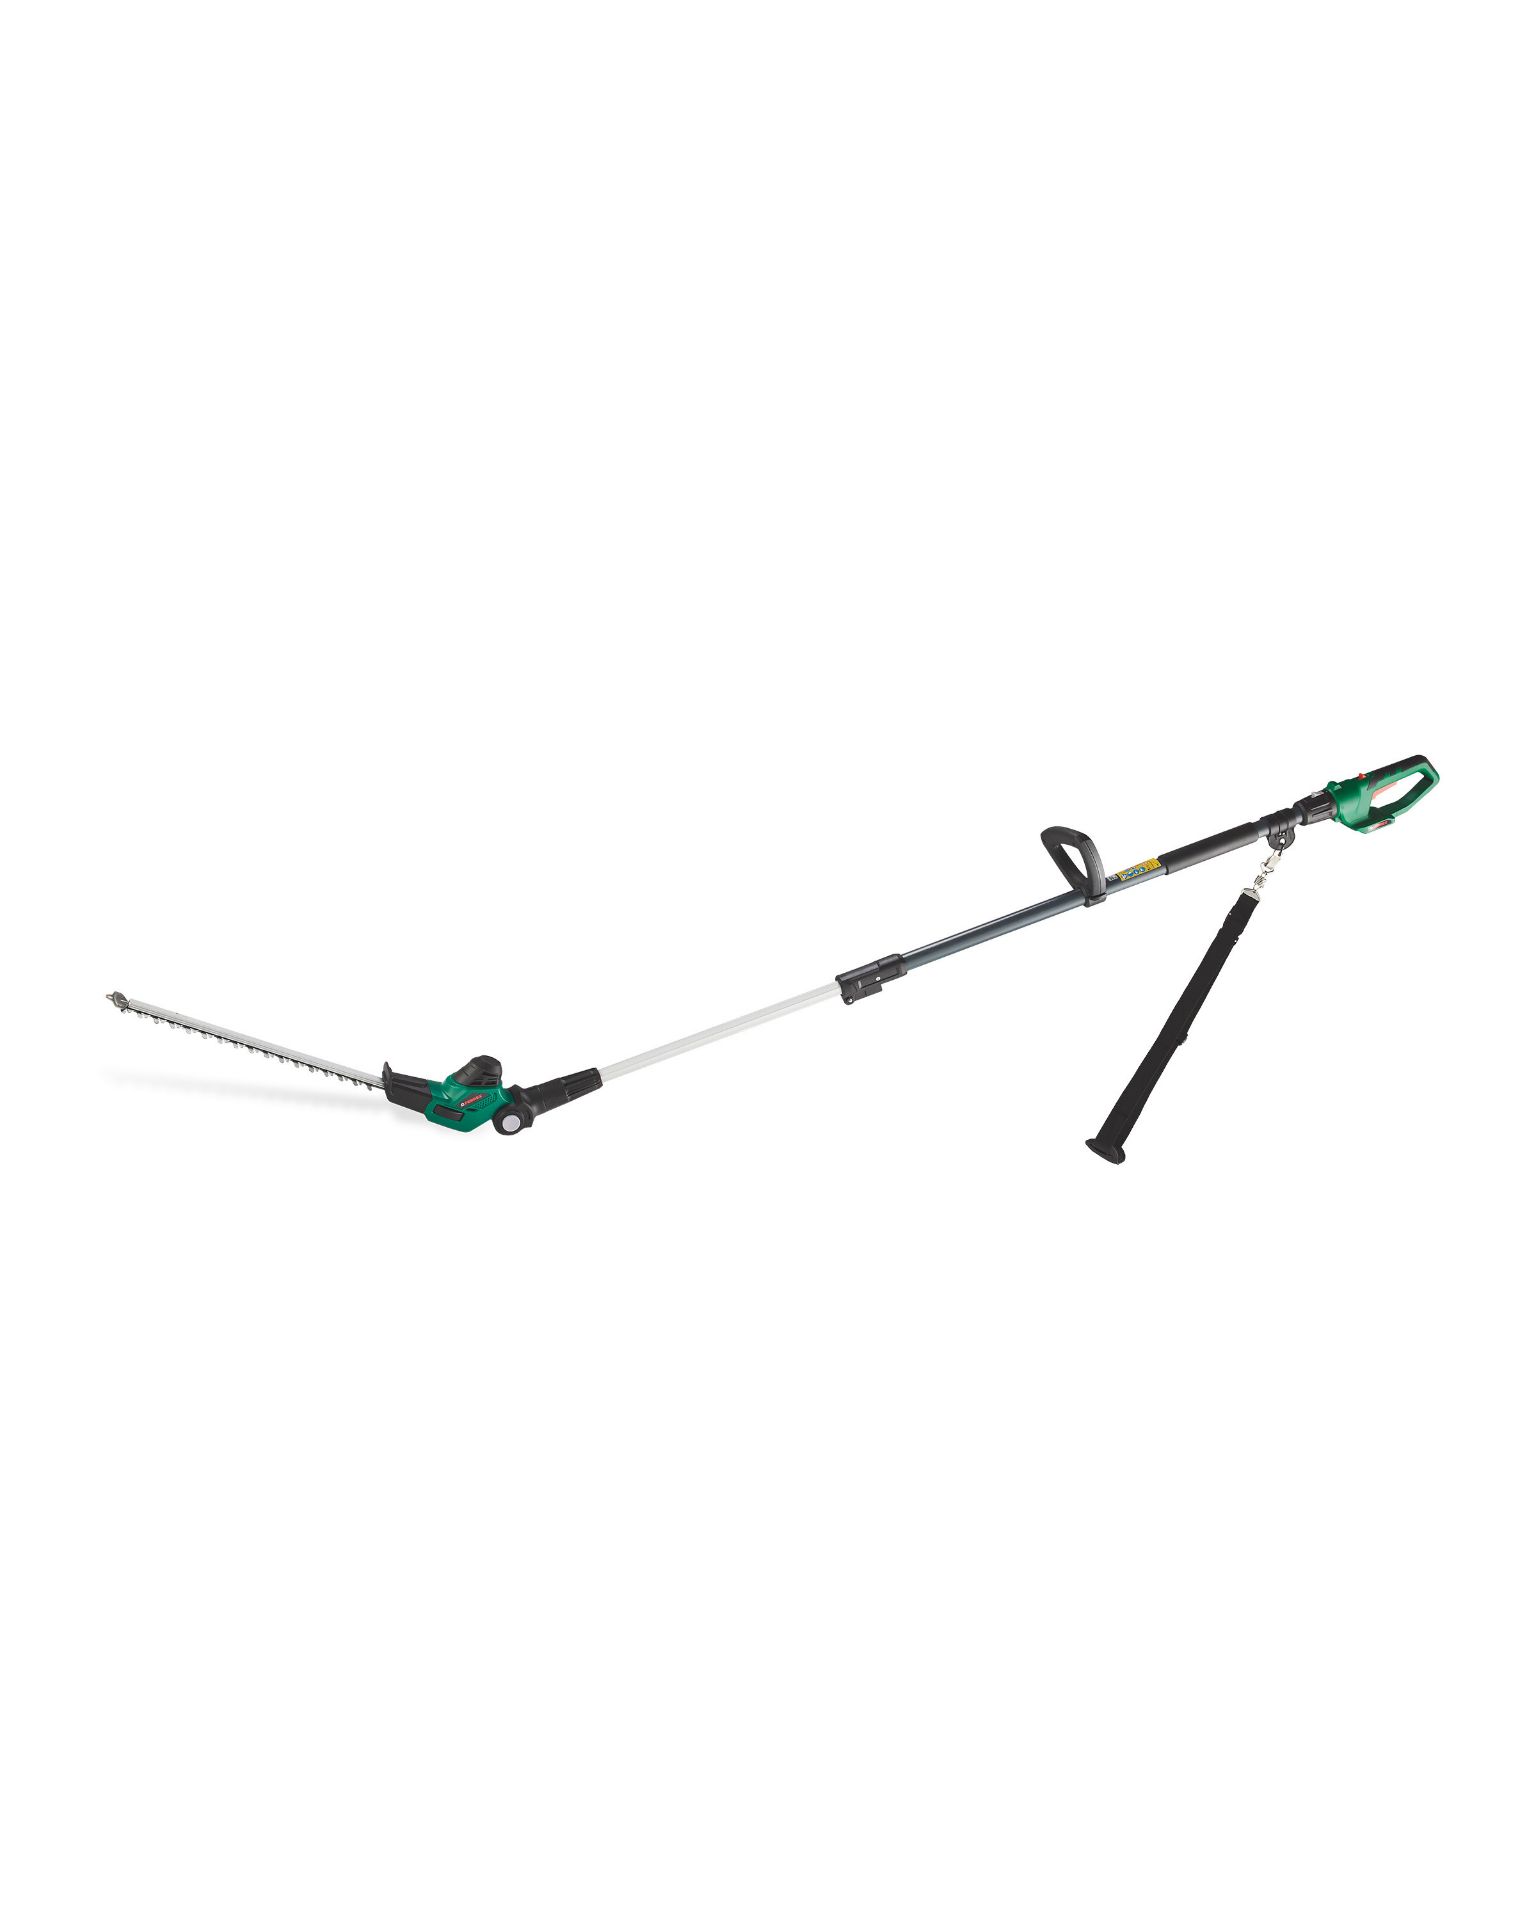 Boxed Ferrex 20V Lithium Iron Cordless Telescopic Hedge Trimmer RRP £45 (Public Viewing and